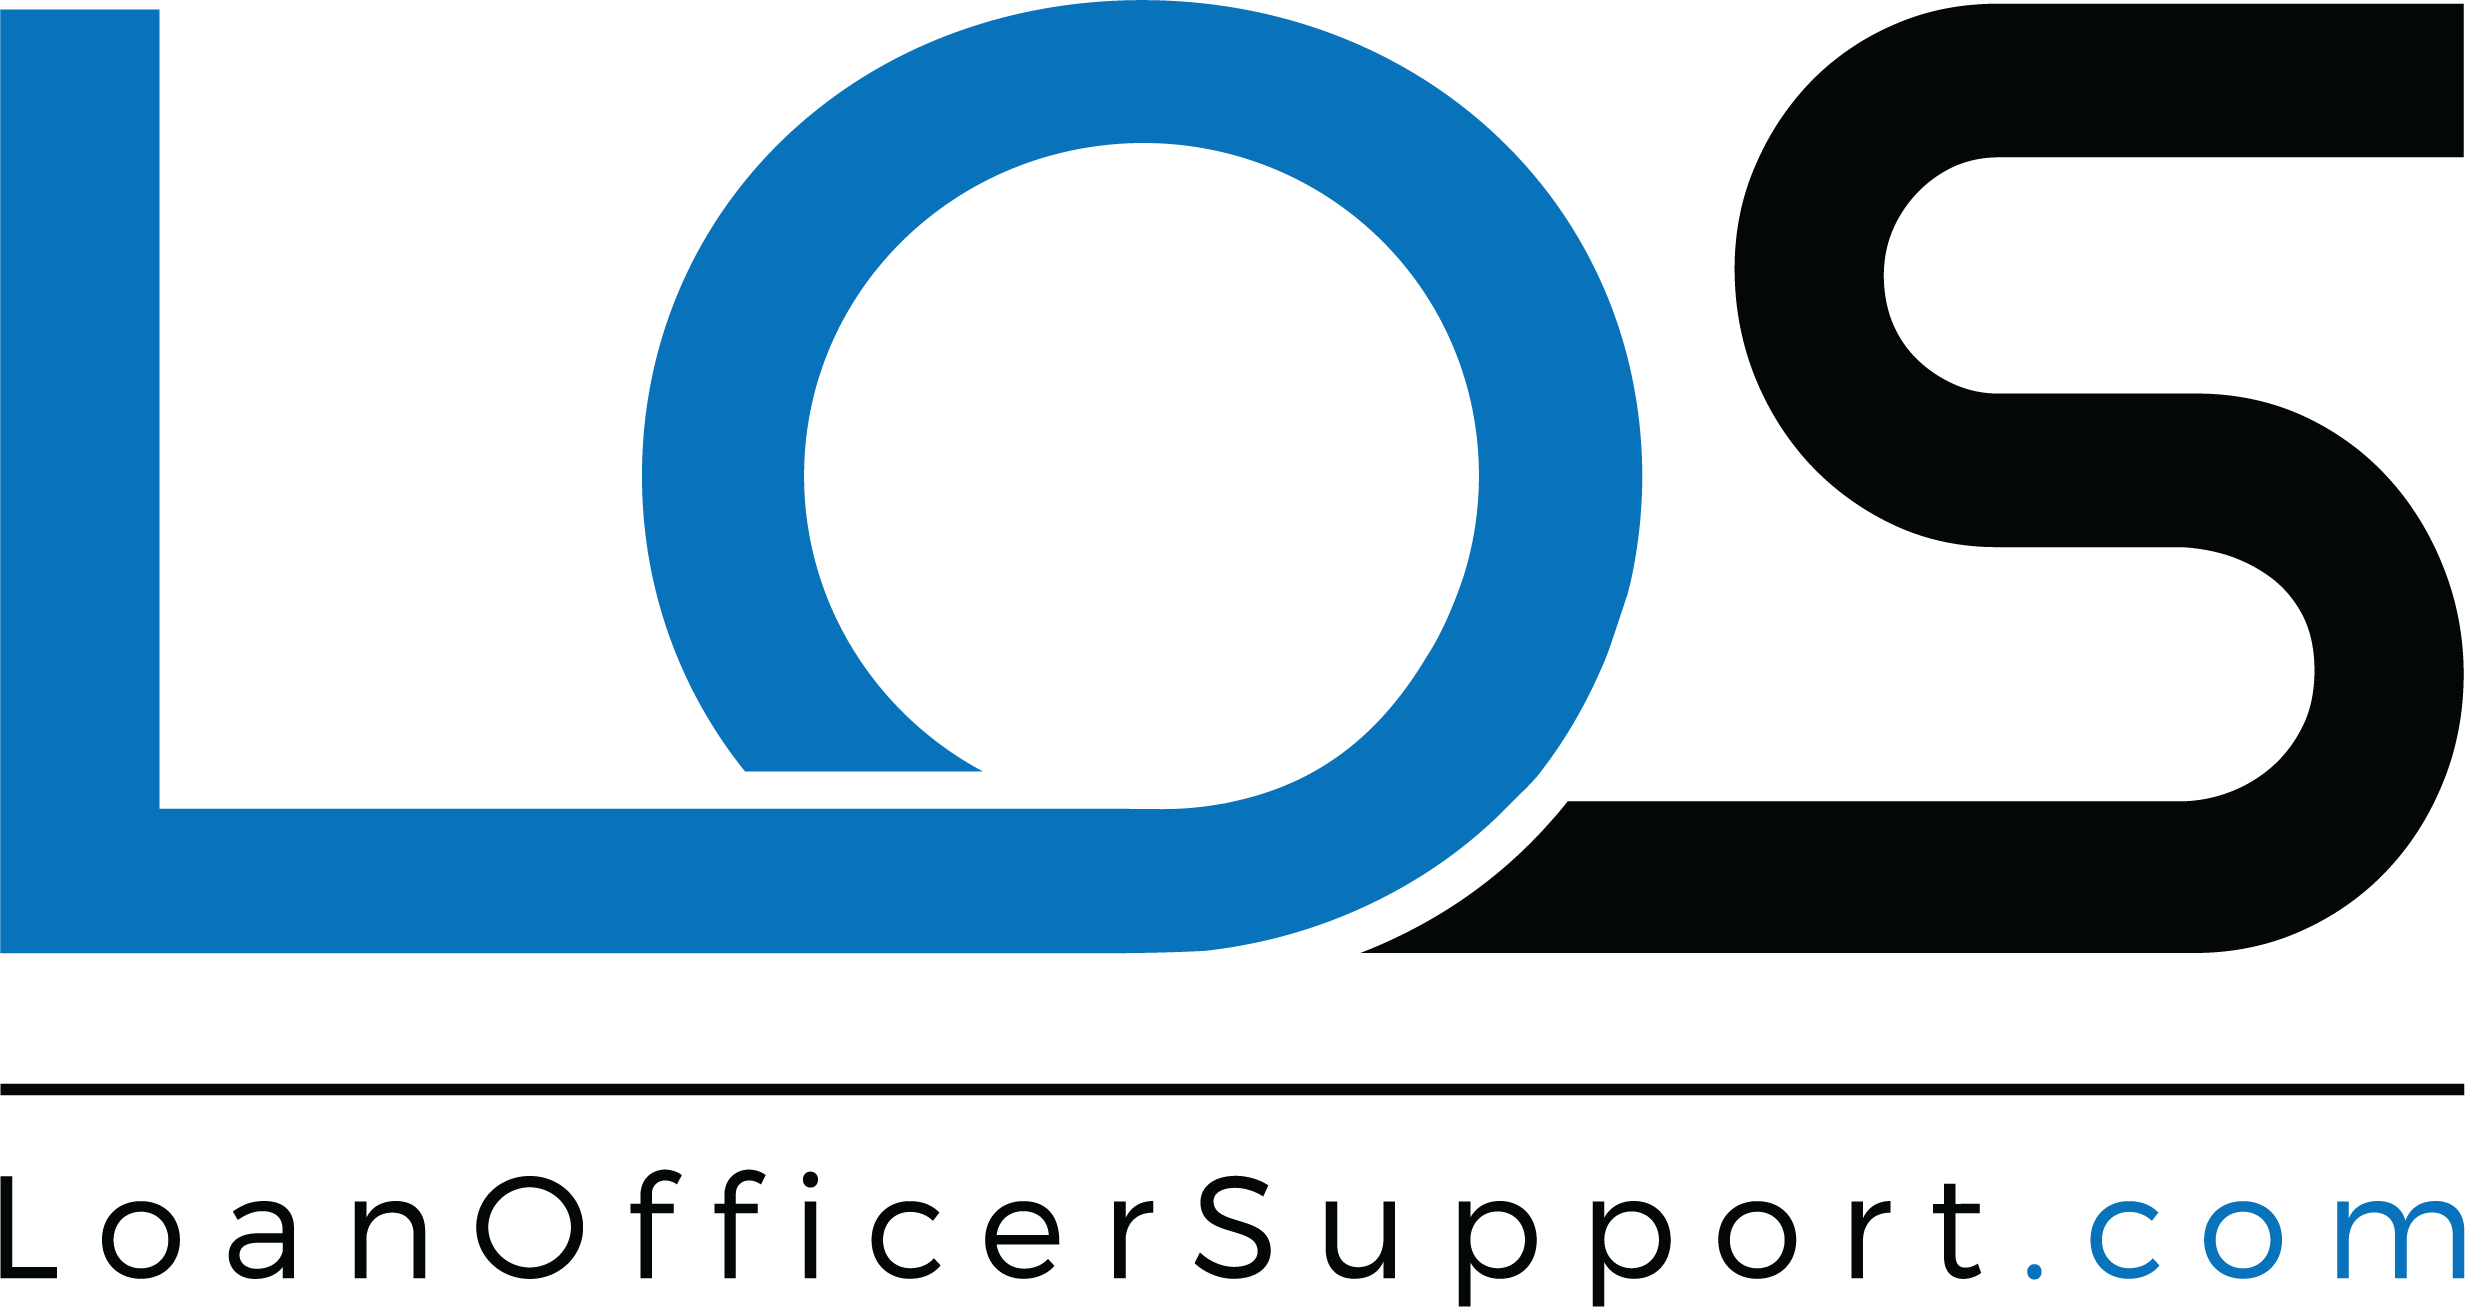 Loan Officer Support